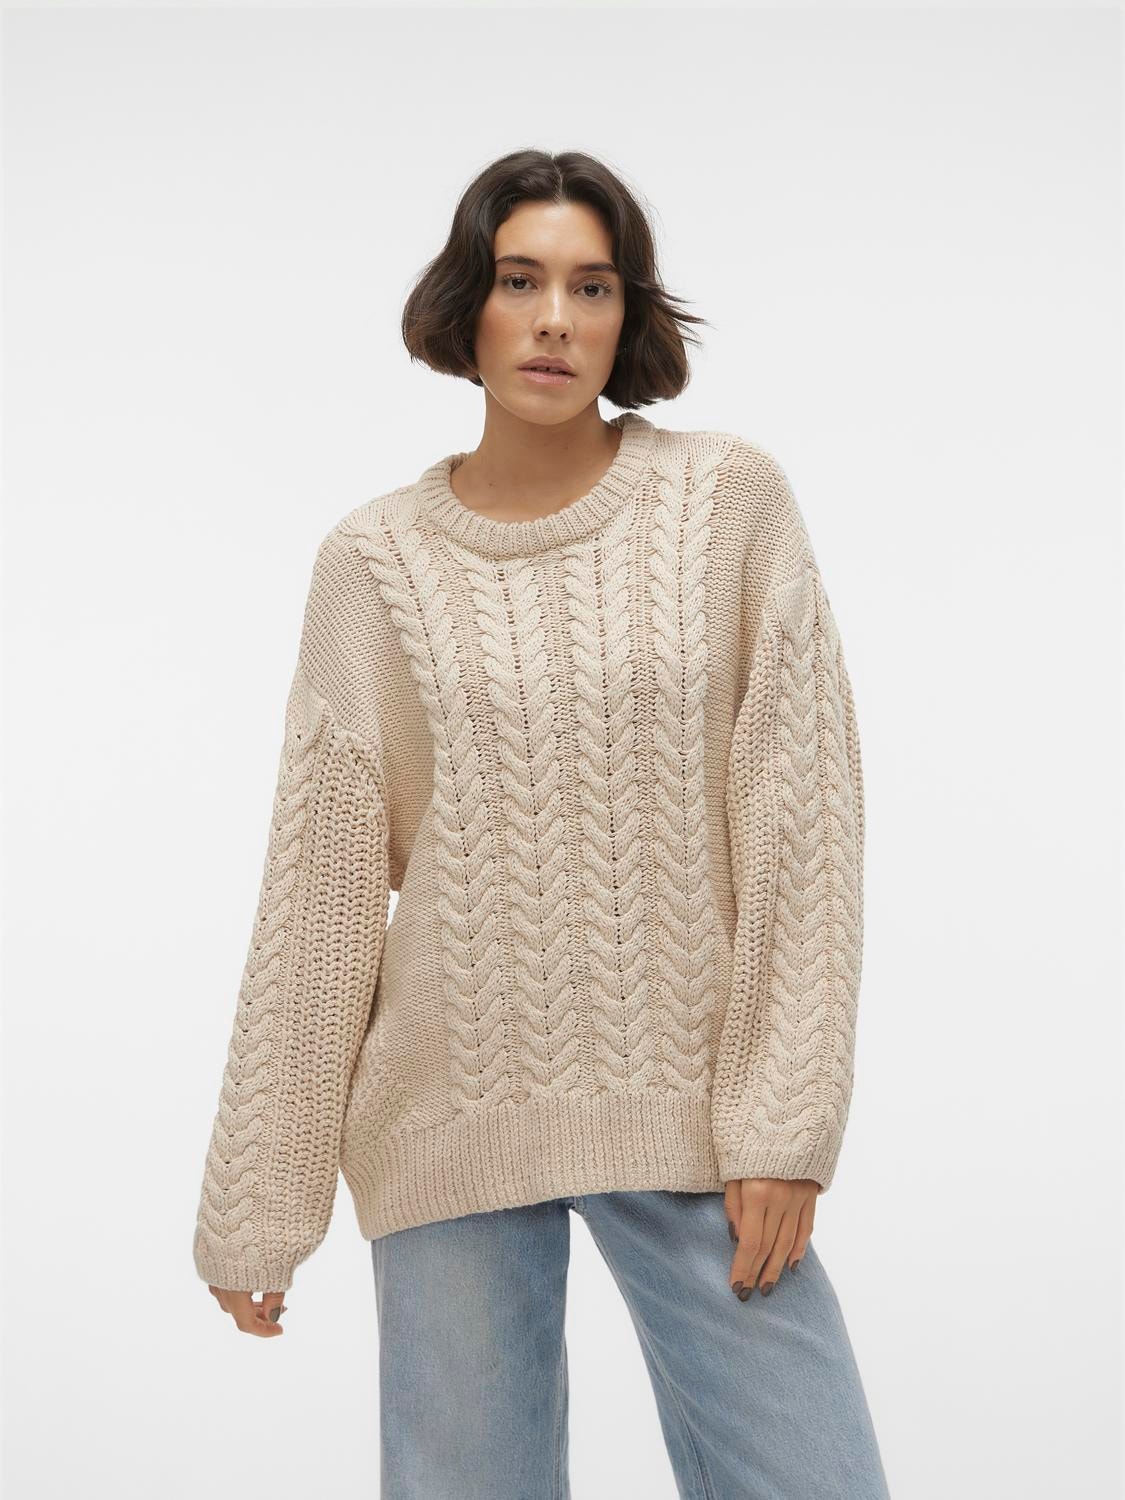 Vero Moda VMSVEACABLE Pull-overs -Oatmeal - 10308363